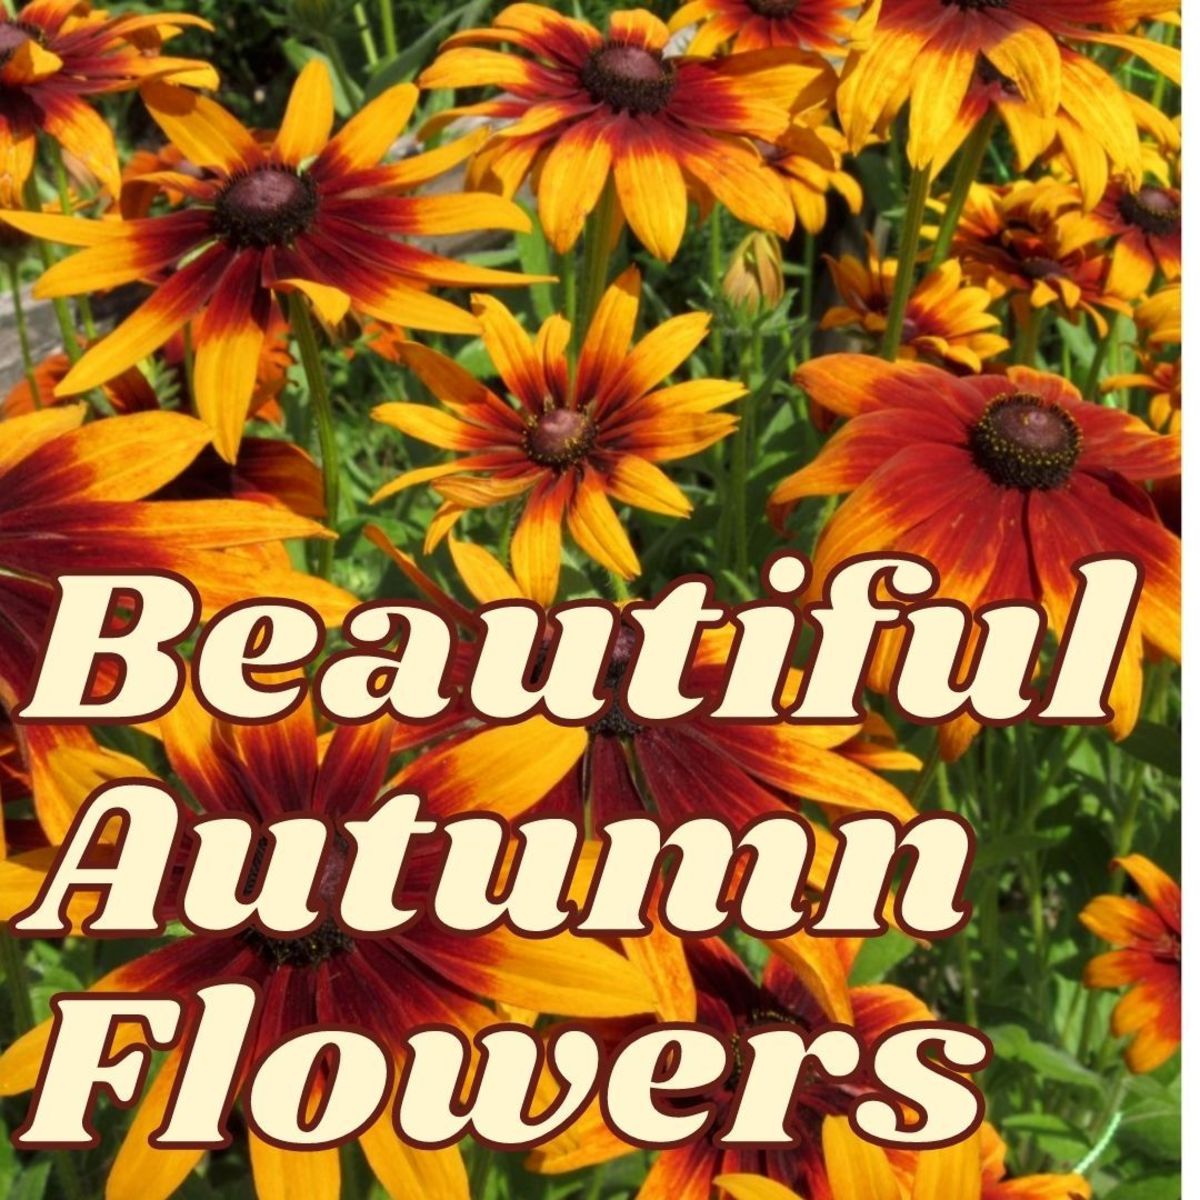 If you really love flowers, you should make sure that they enhance the autumn color themes that take over at the end of each season.